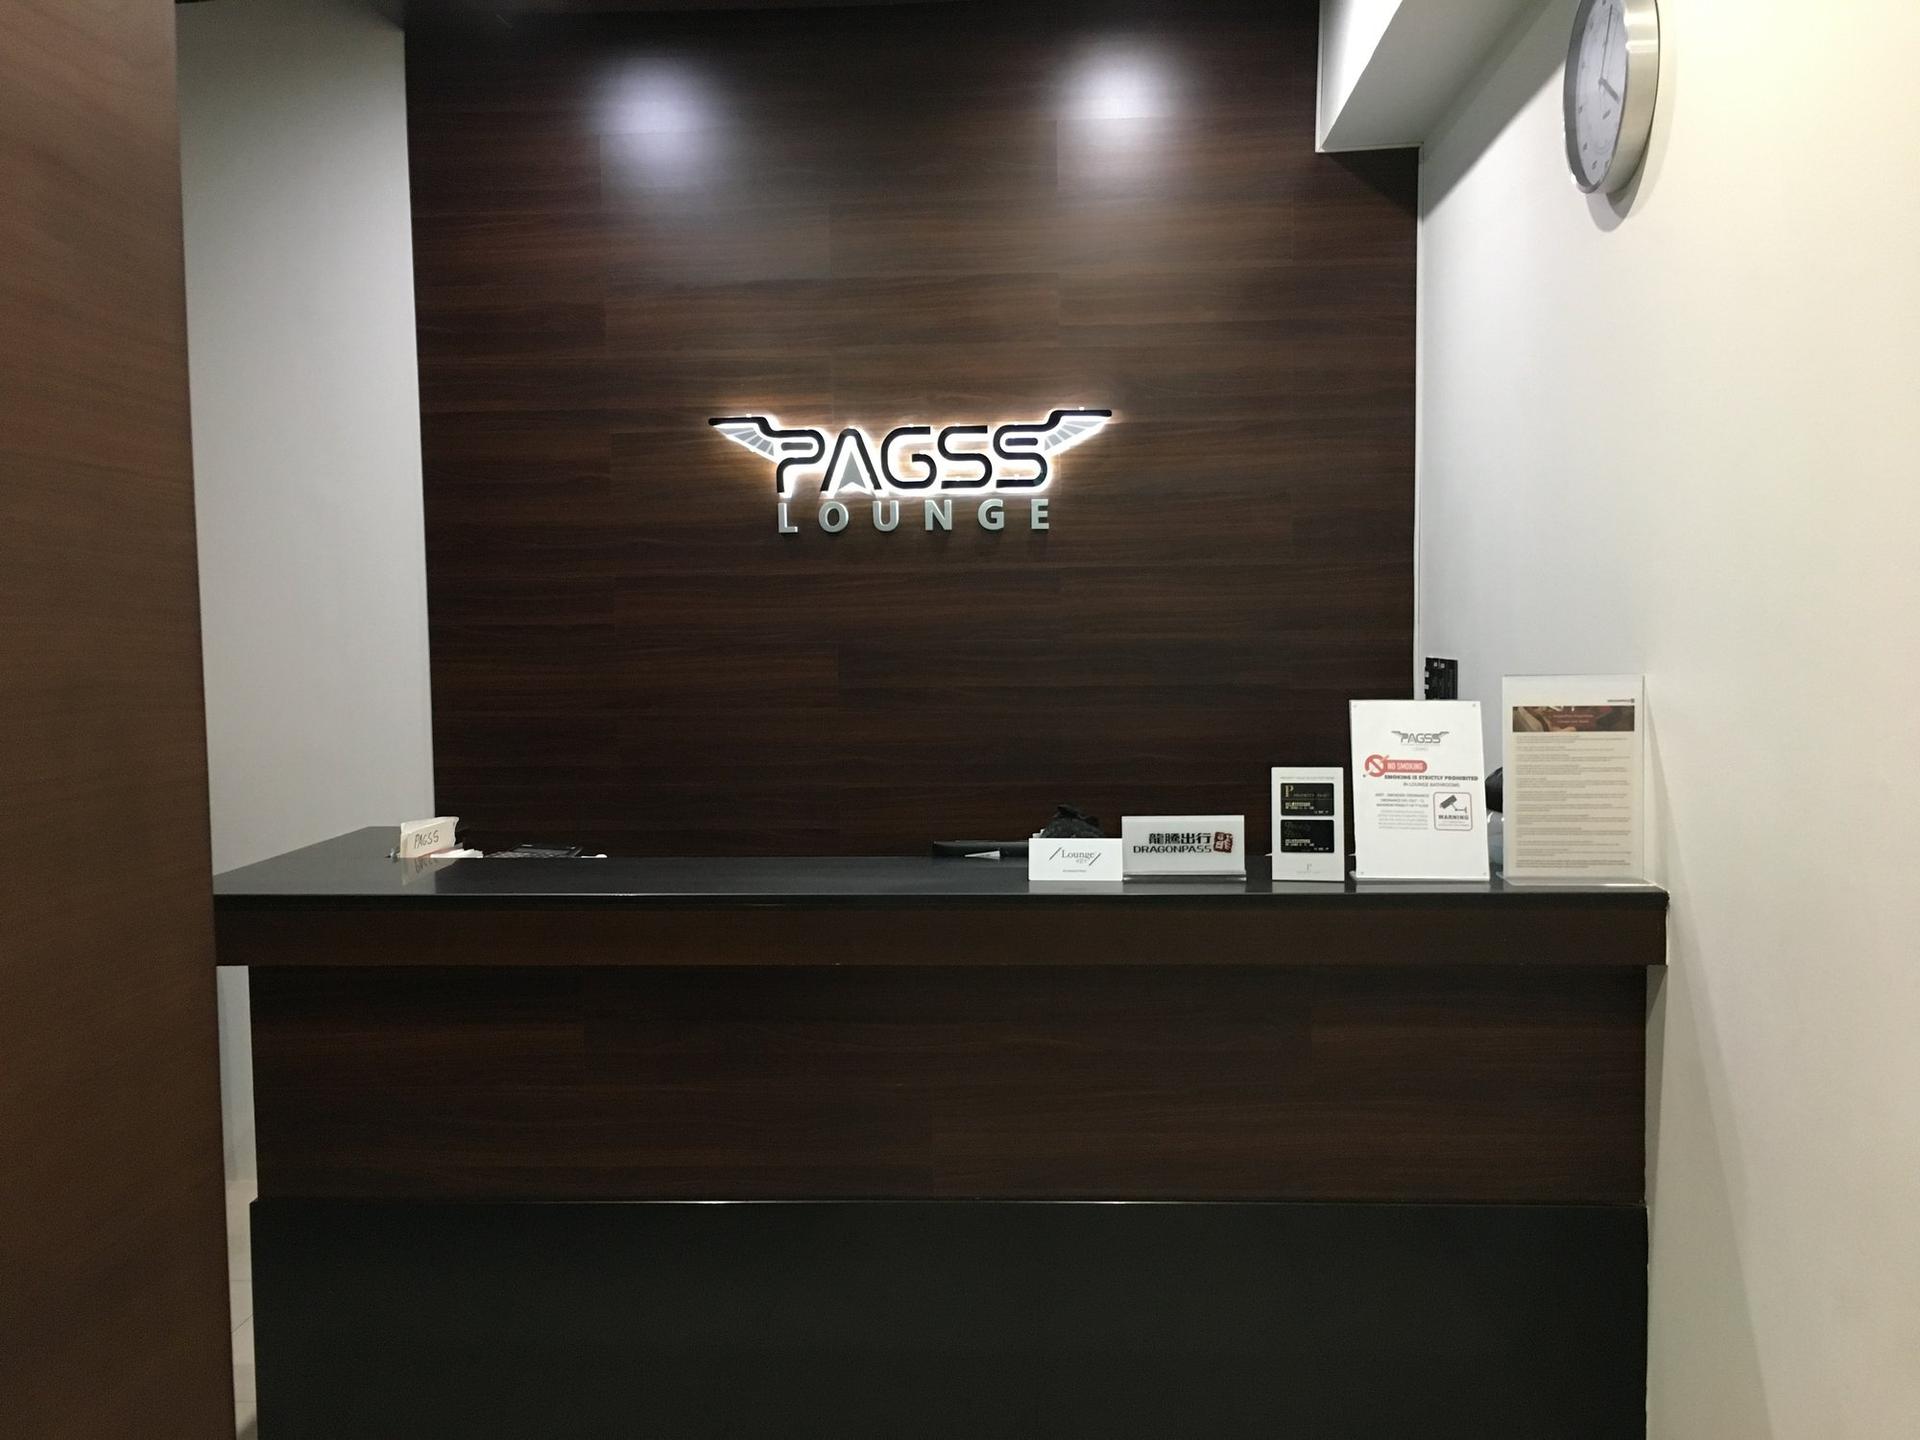 PAGSS Premium Lounge (Domestic) image 5 of 24